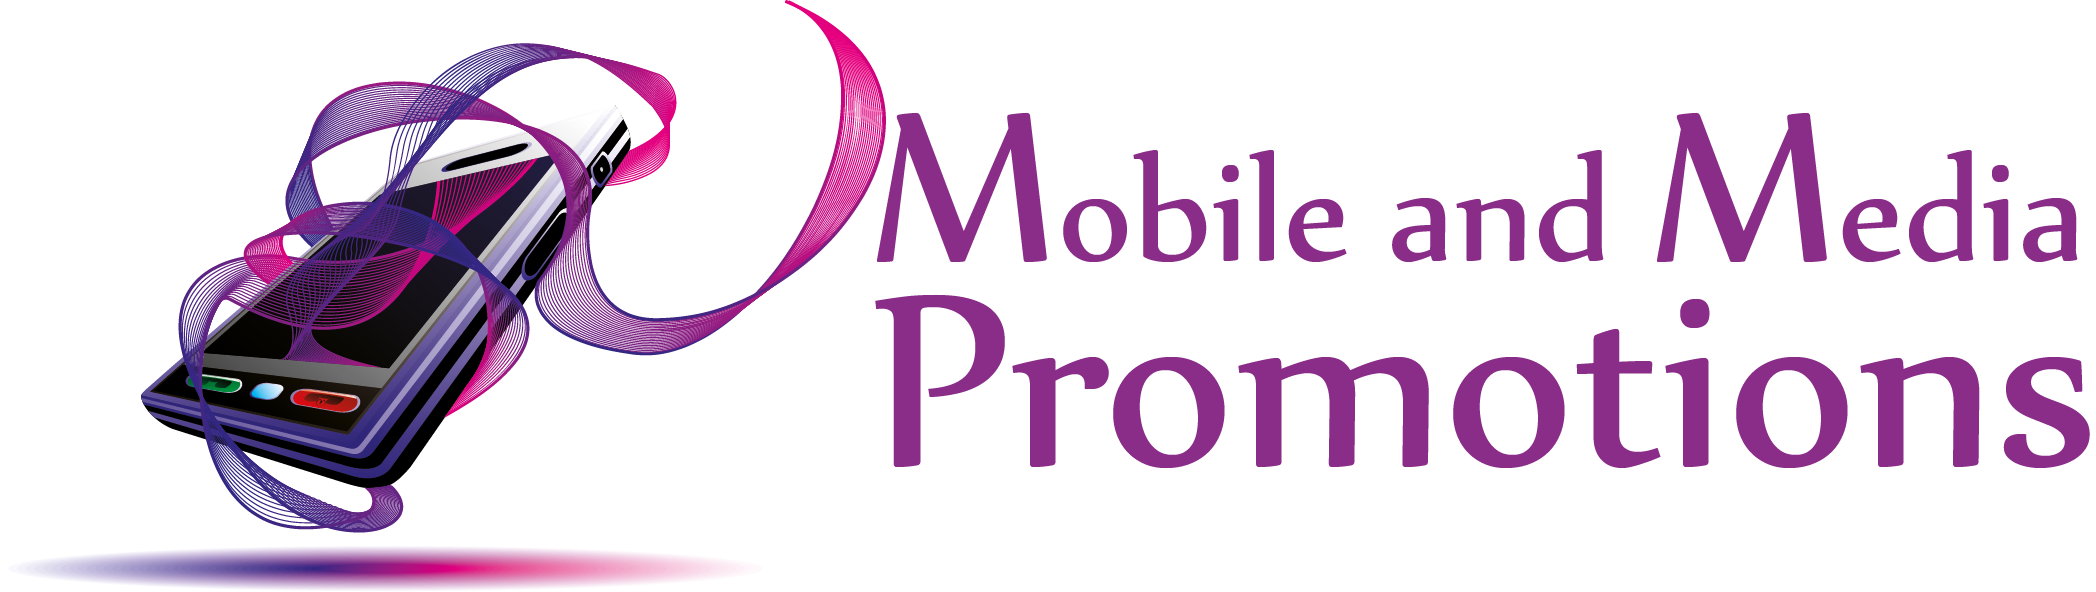 Mobile and Media Promotions, a chatbot developer